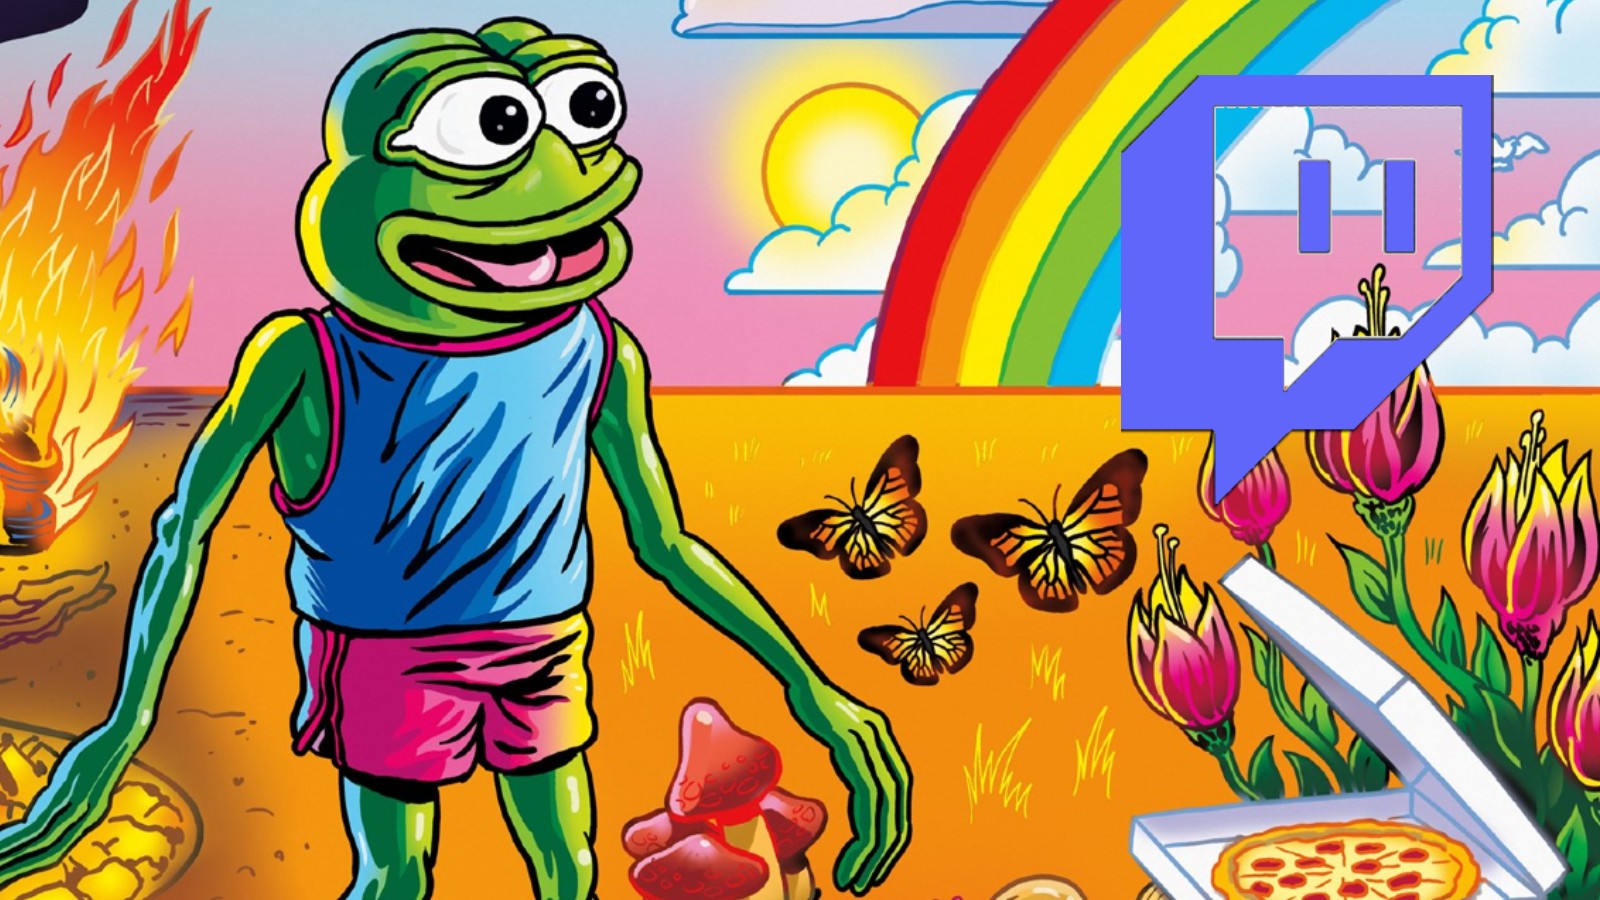 Pepe the Frog creator left baffled by Pepe emotes on Twitch - Dexerto